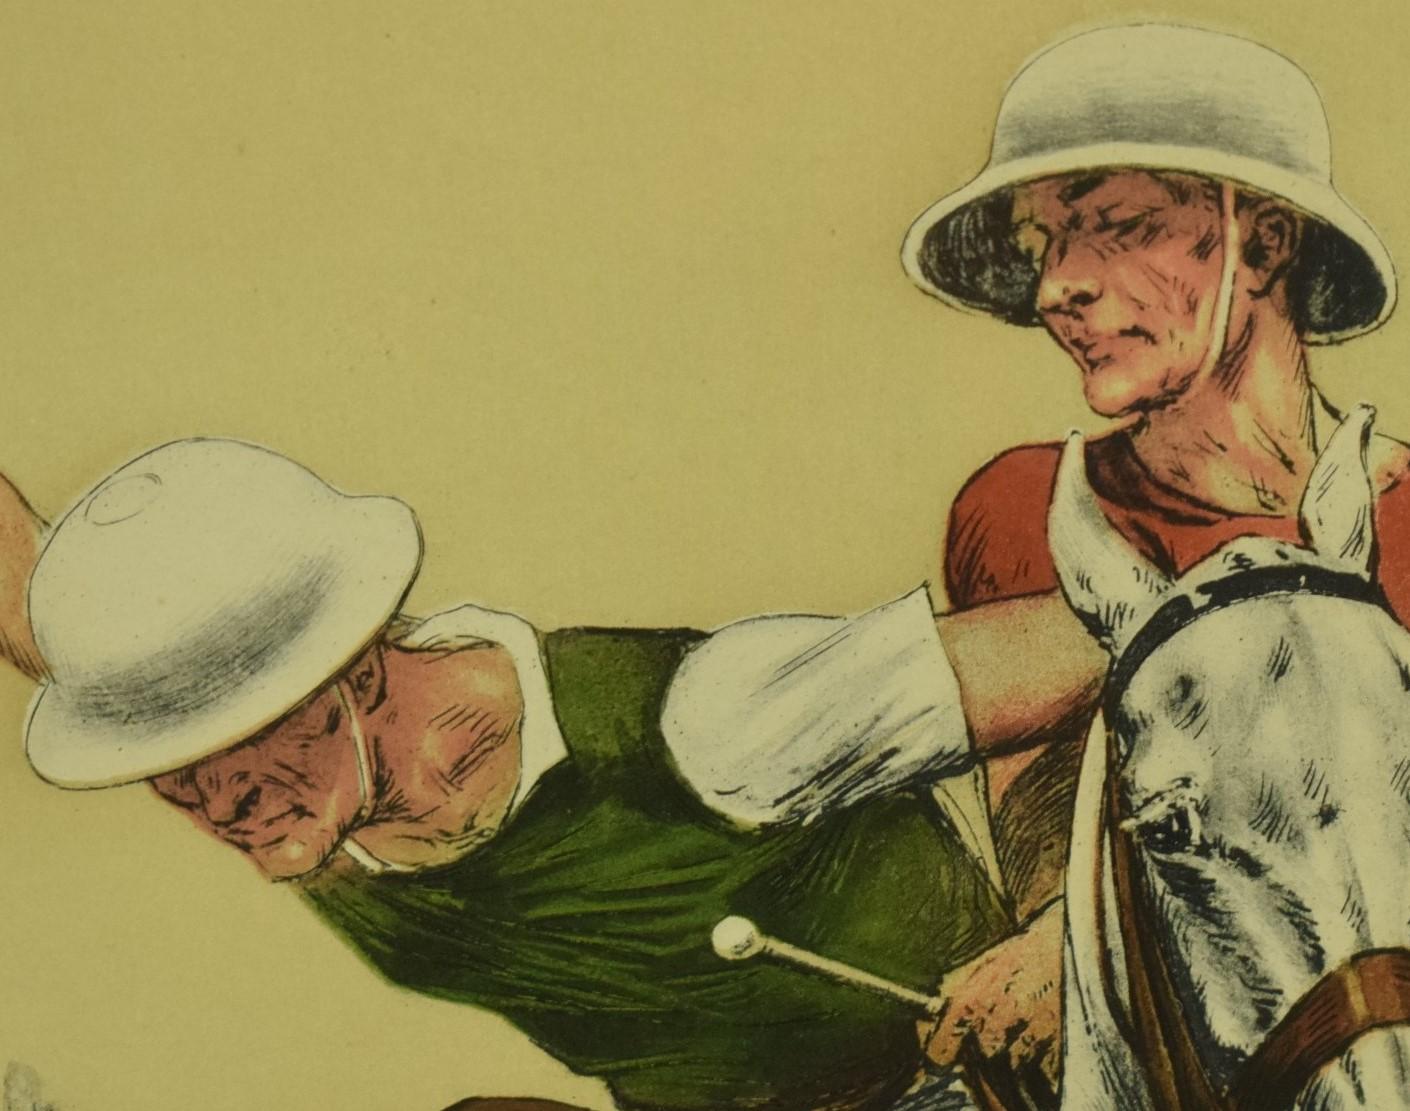 Stylish equestrian image of two polo players attacking the ball

Hand-coloured lithograph

1930s

Art Sz: 23 3/4